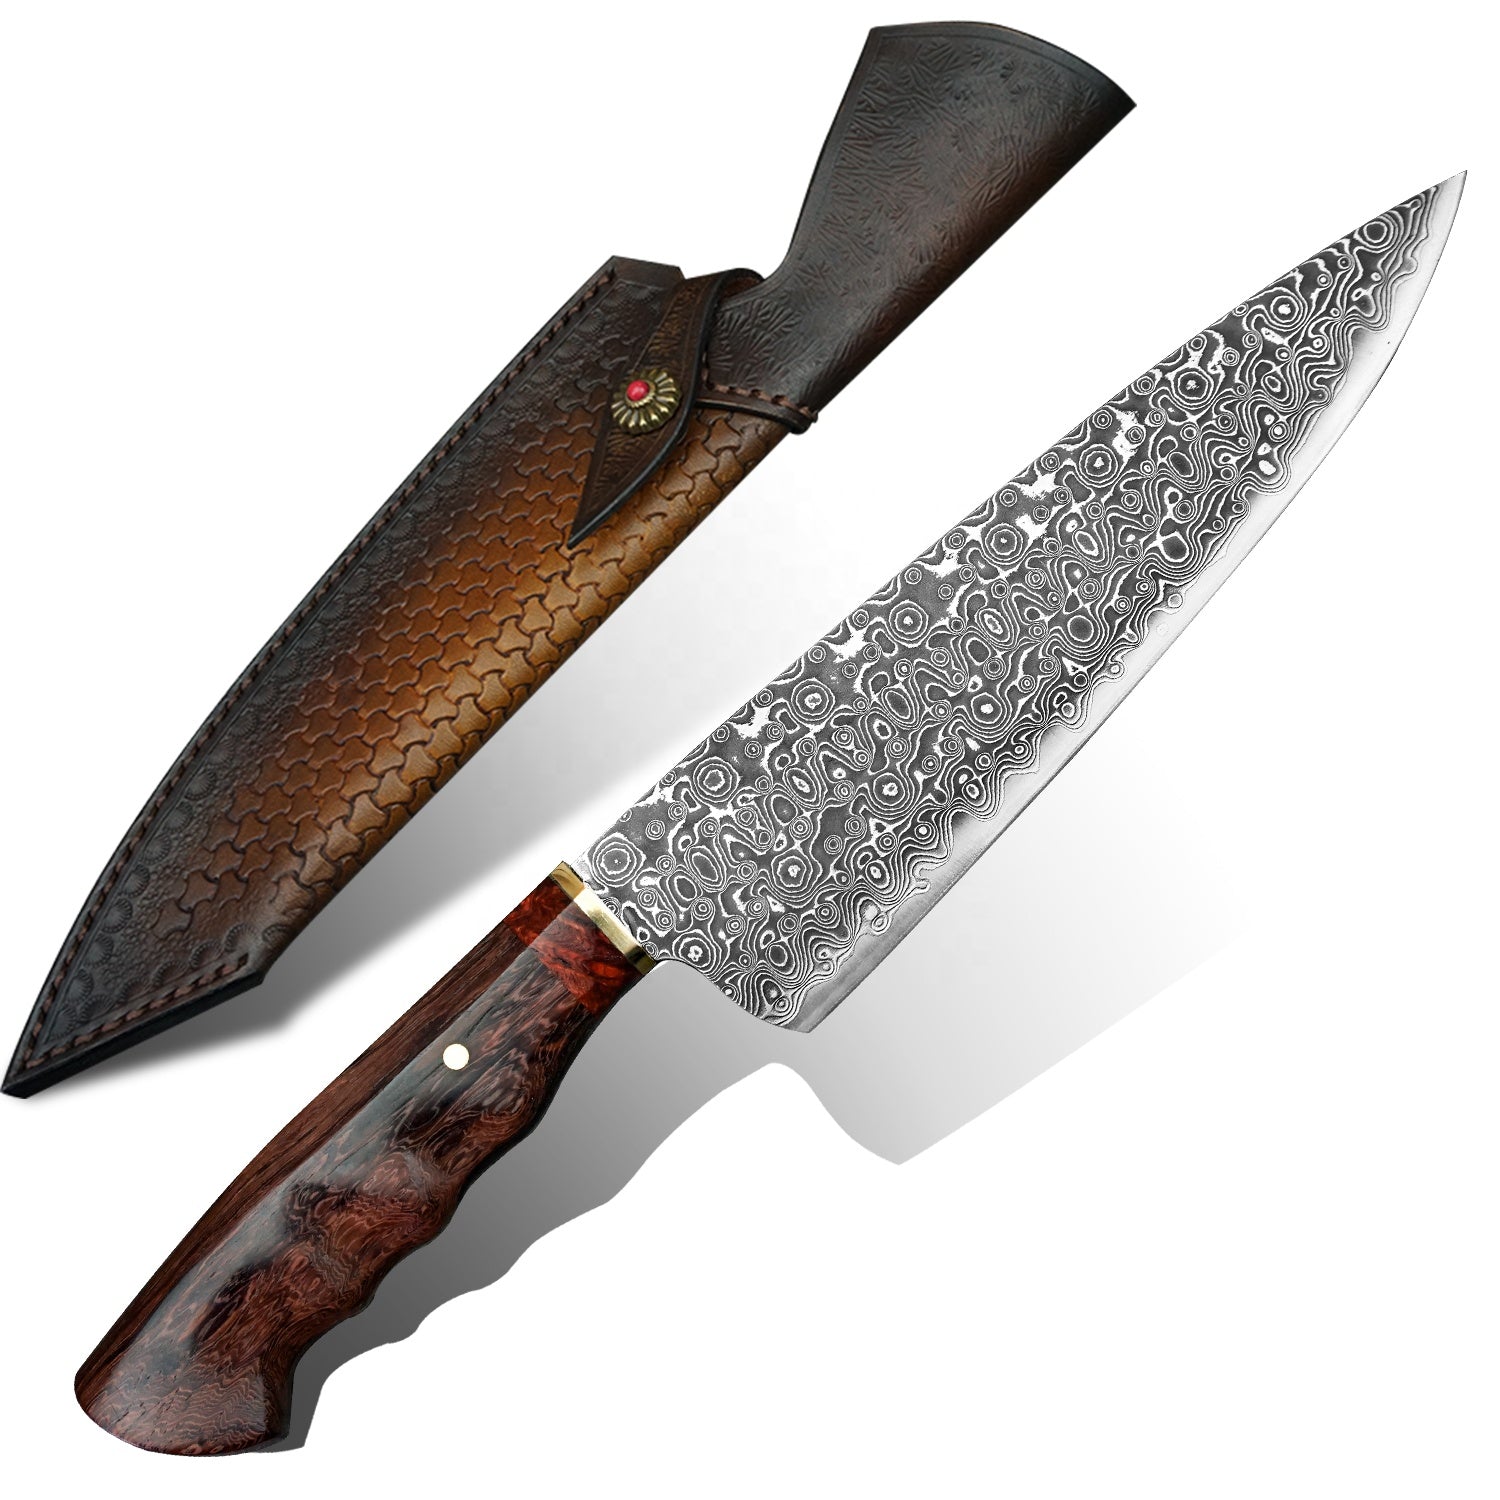 Handmade 8 inch Rosewood Handle Japanese VG10 Damascus Steel Kitchen Chef Knife with Leather Sheath